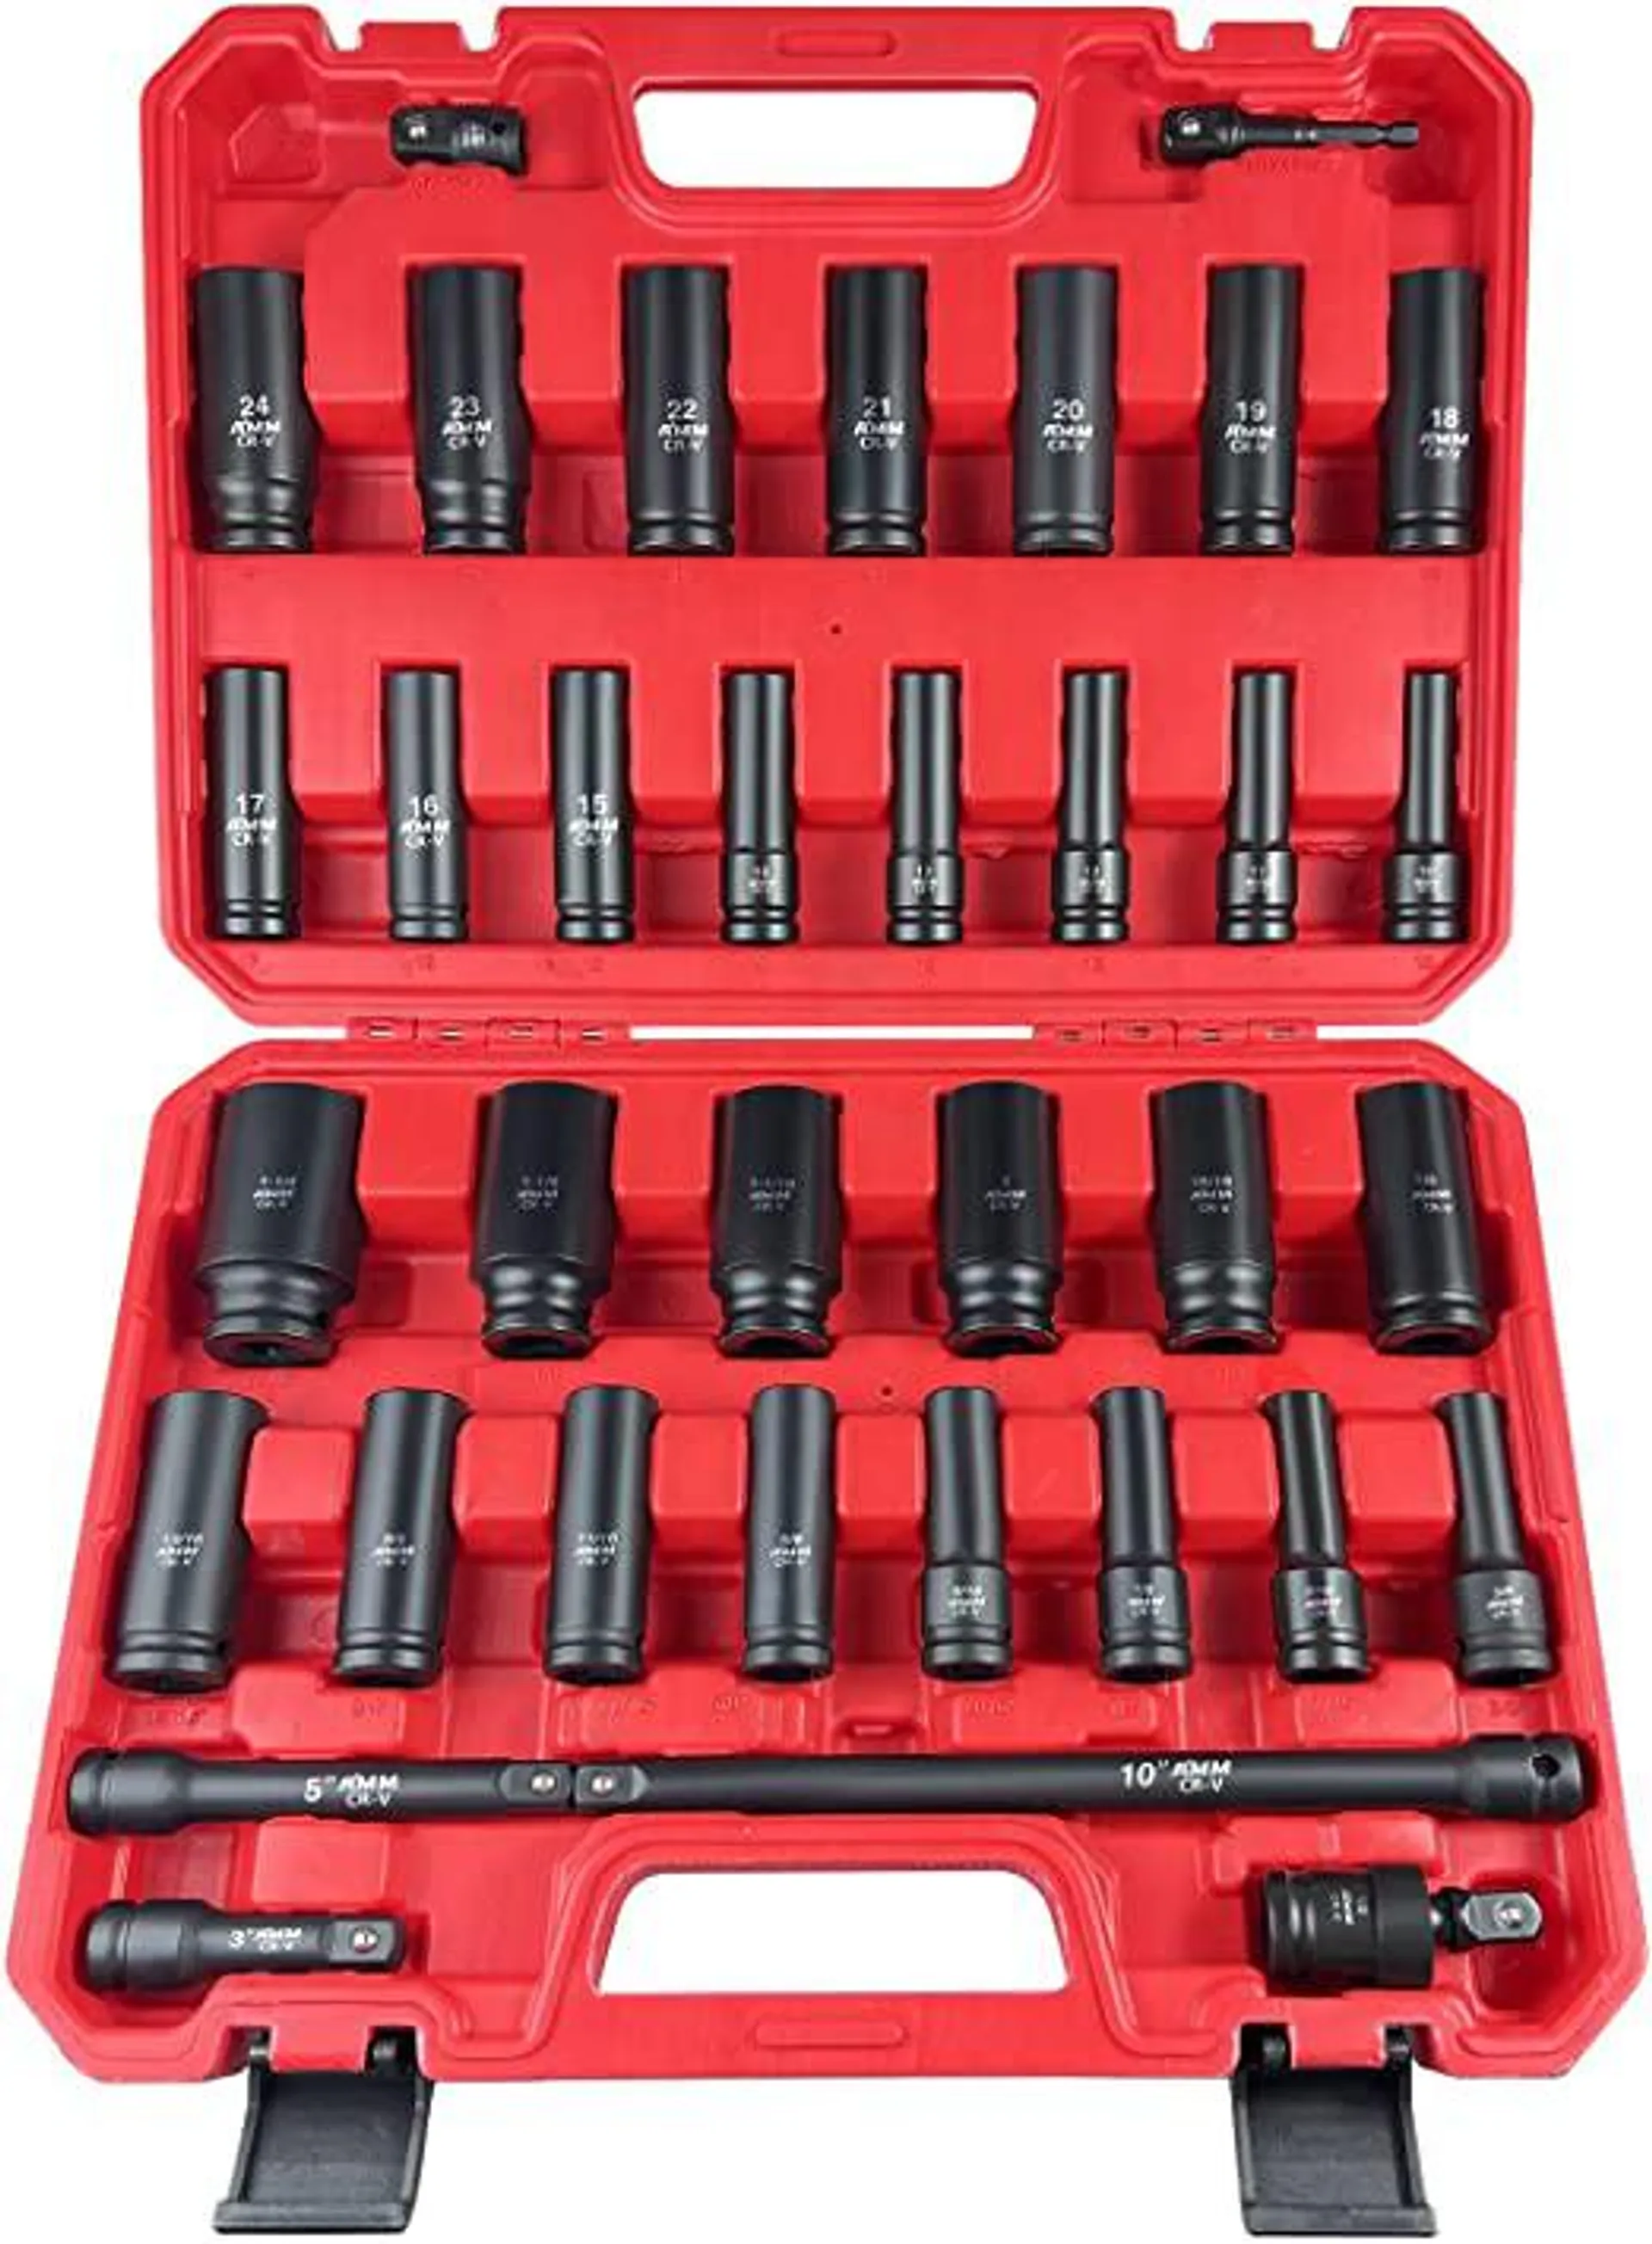 AMM 1/2" Drive Impact Socket Set，35-Piece Standard SAE (3/8 to 1-1/4 inch) and Metric (10-24mm) Size，3" 5"10"Drive Extension Bar，1/2" Impact Universal Joint，3/8" to 1/2" Impact Adaptor，Cr-V Steel